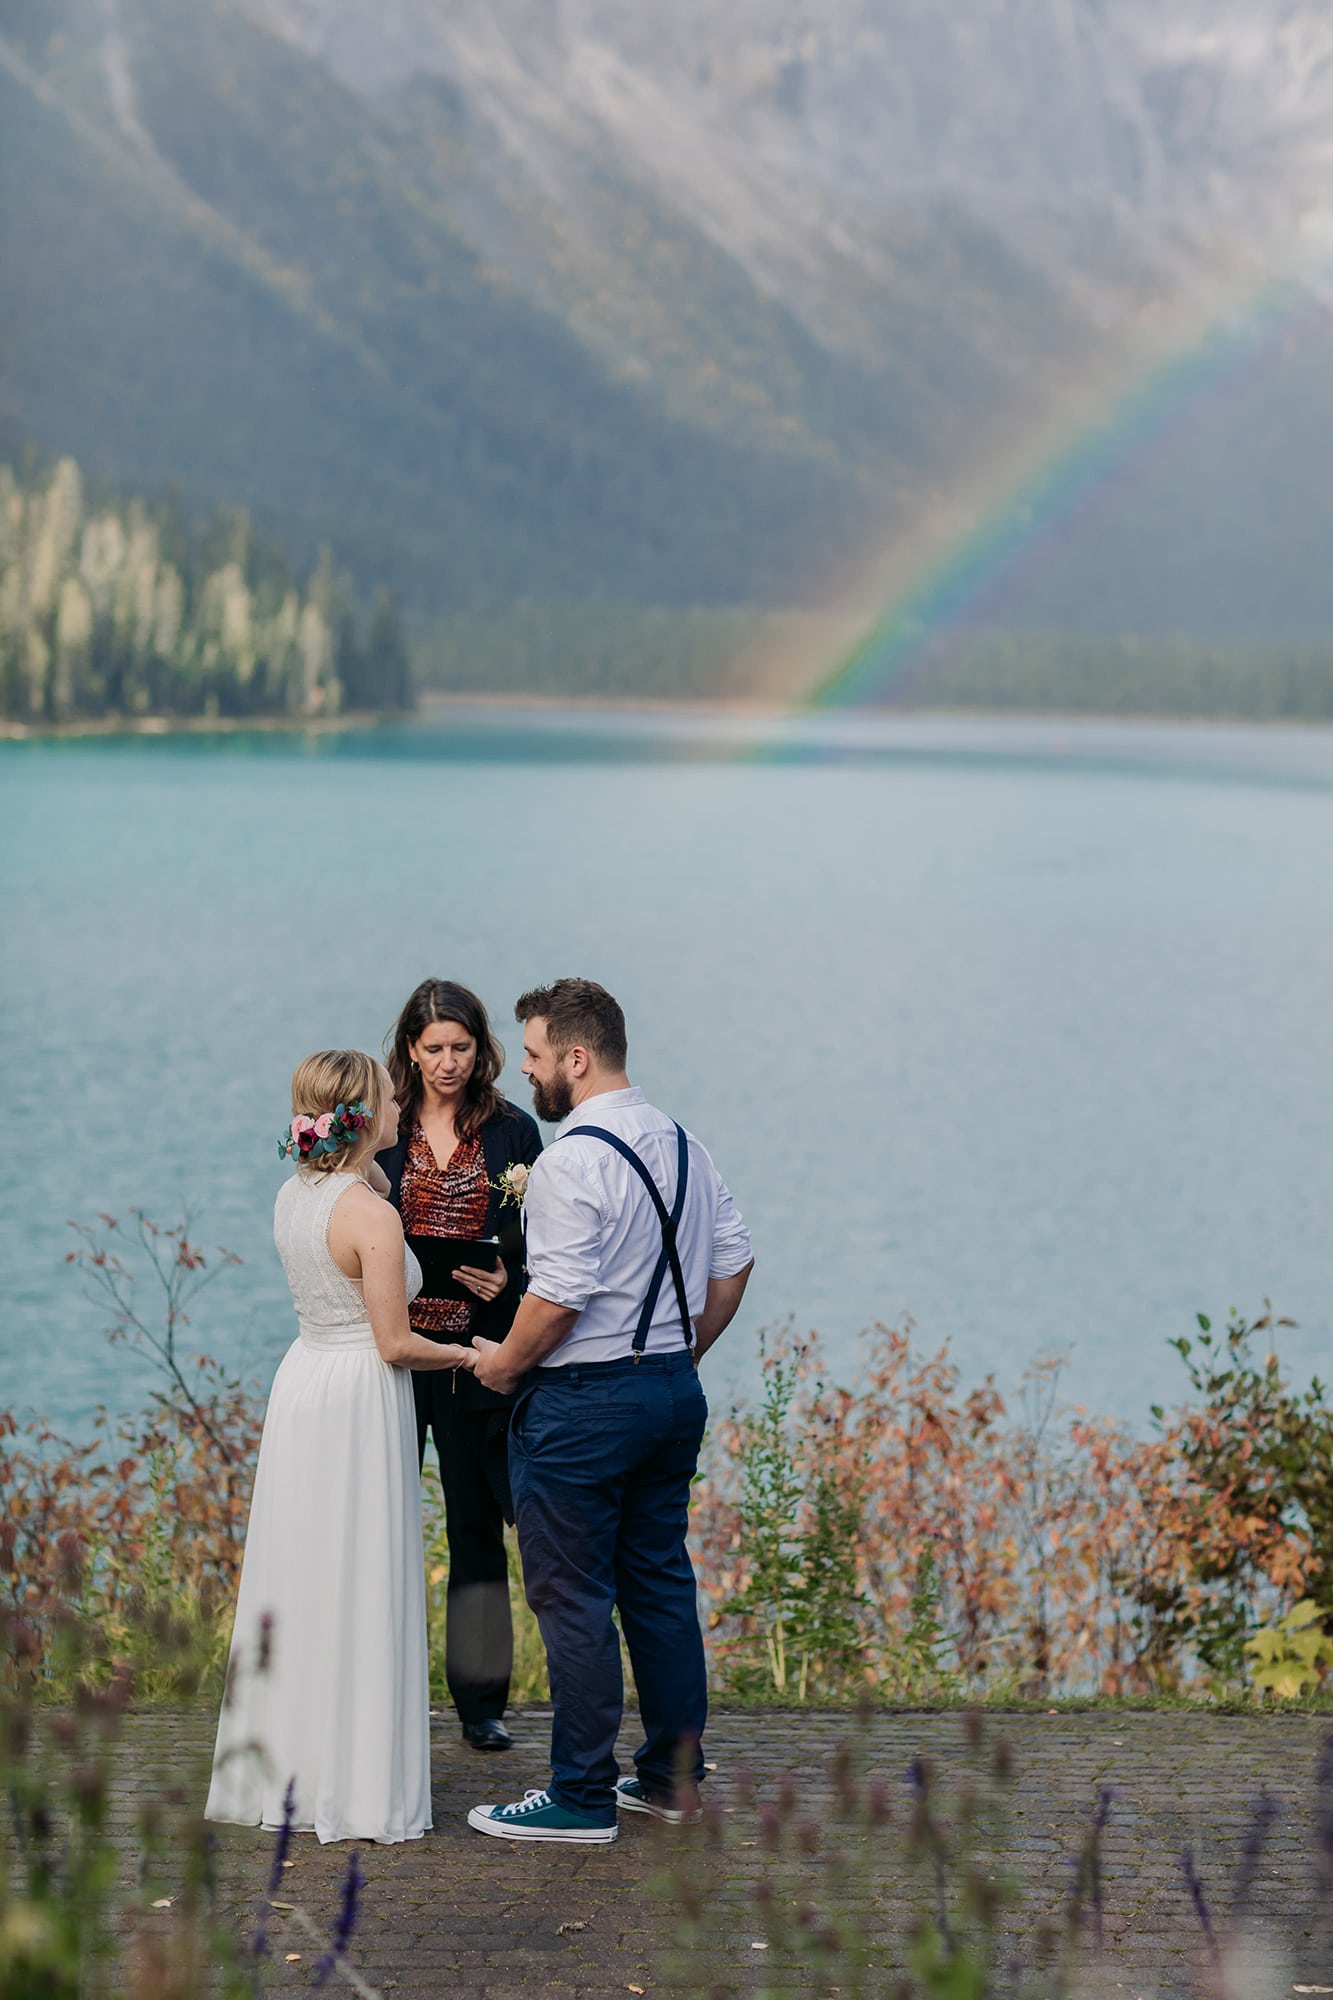 Emerald Lake Elopement Photographer viewpoint outdoor ceremony double rainbow